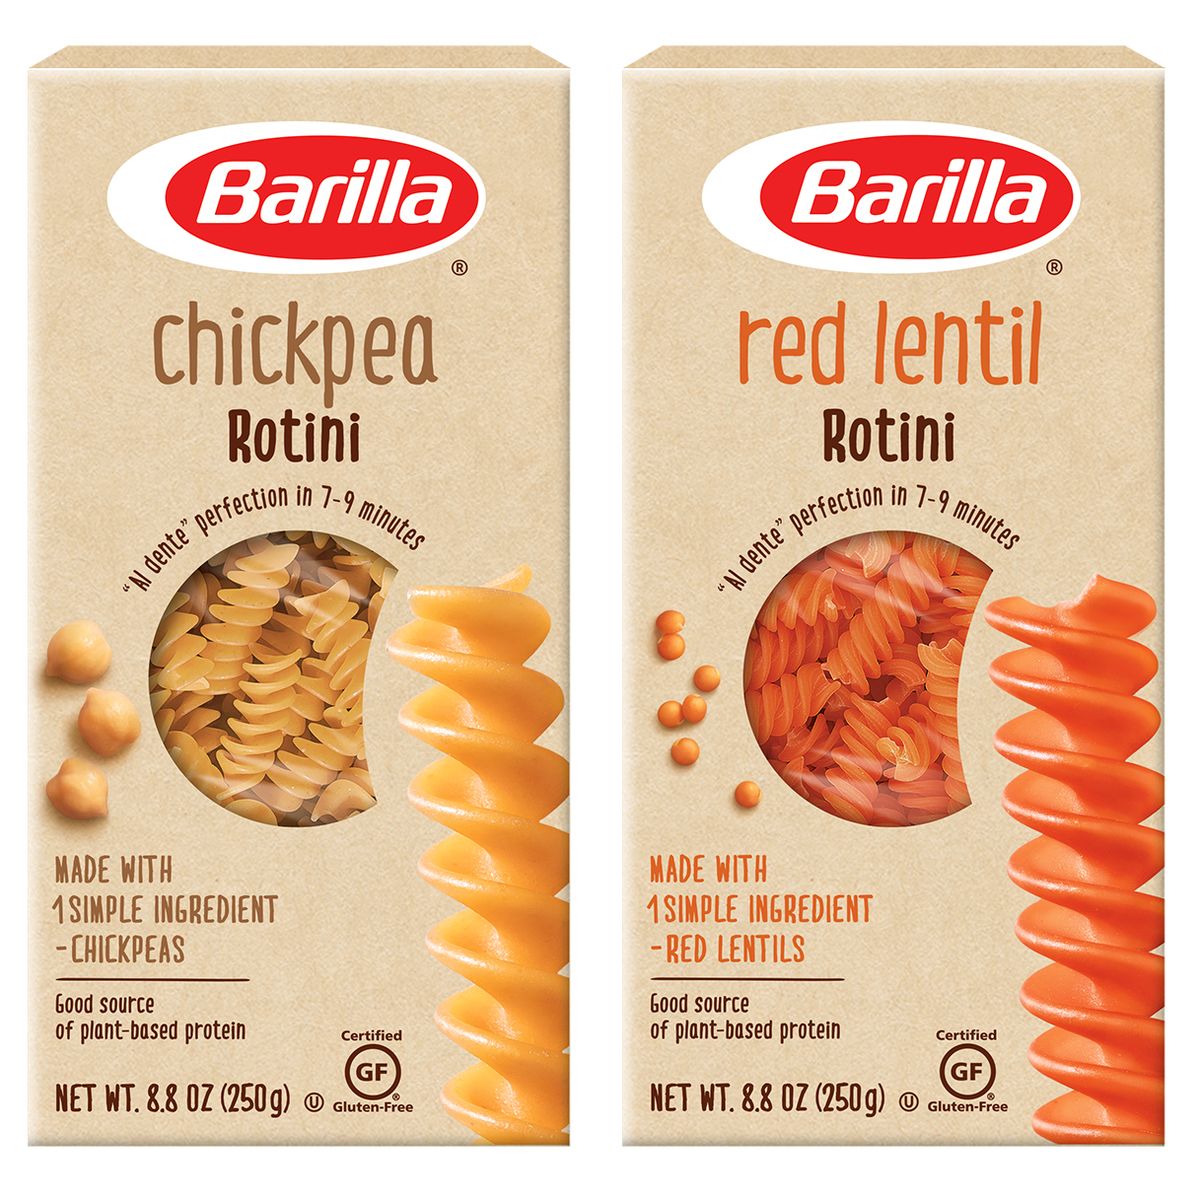 Barilla Is Now Making Protein-Packed Chickpea Pasta